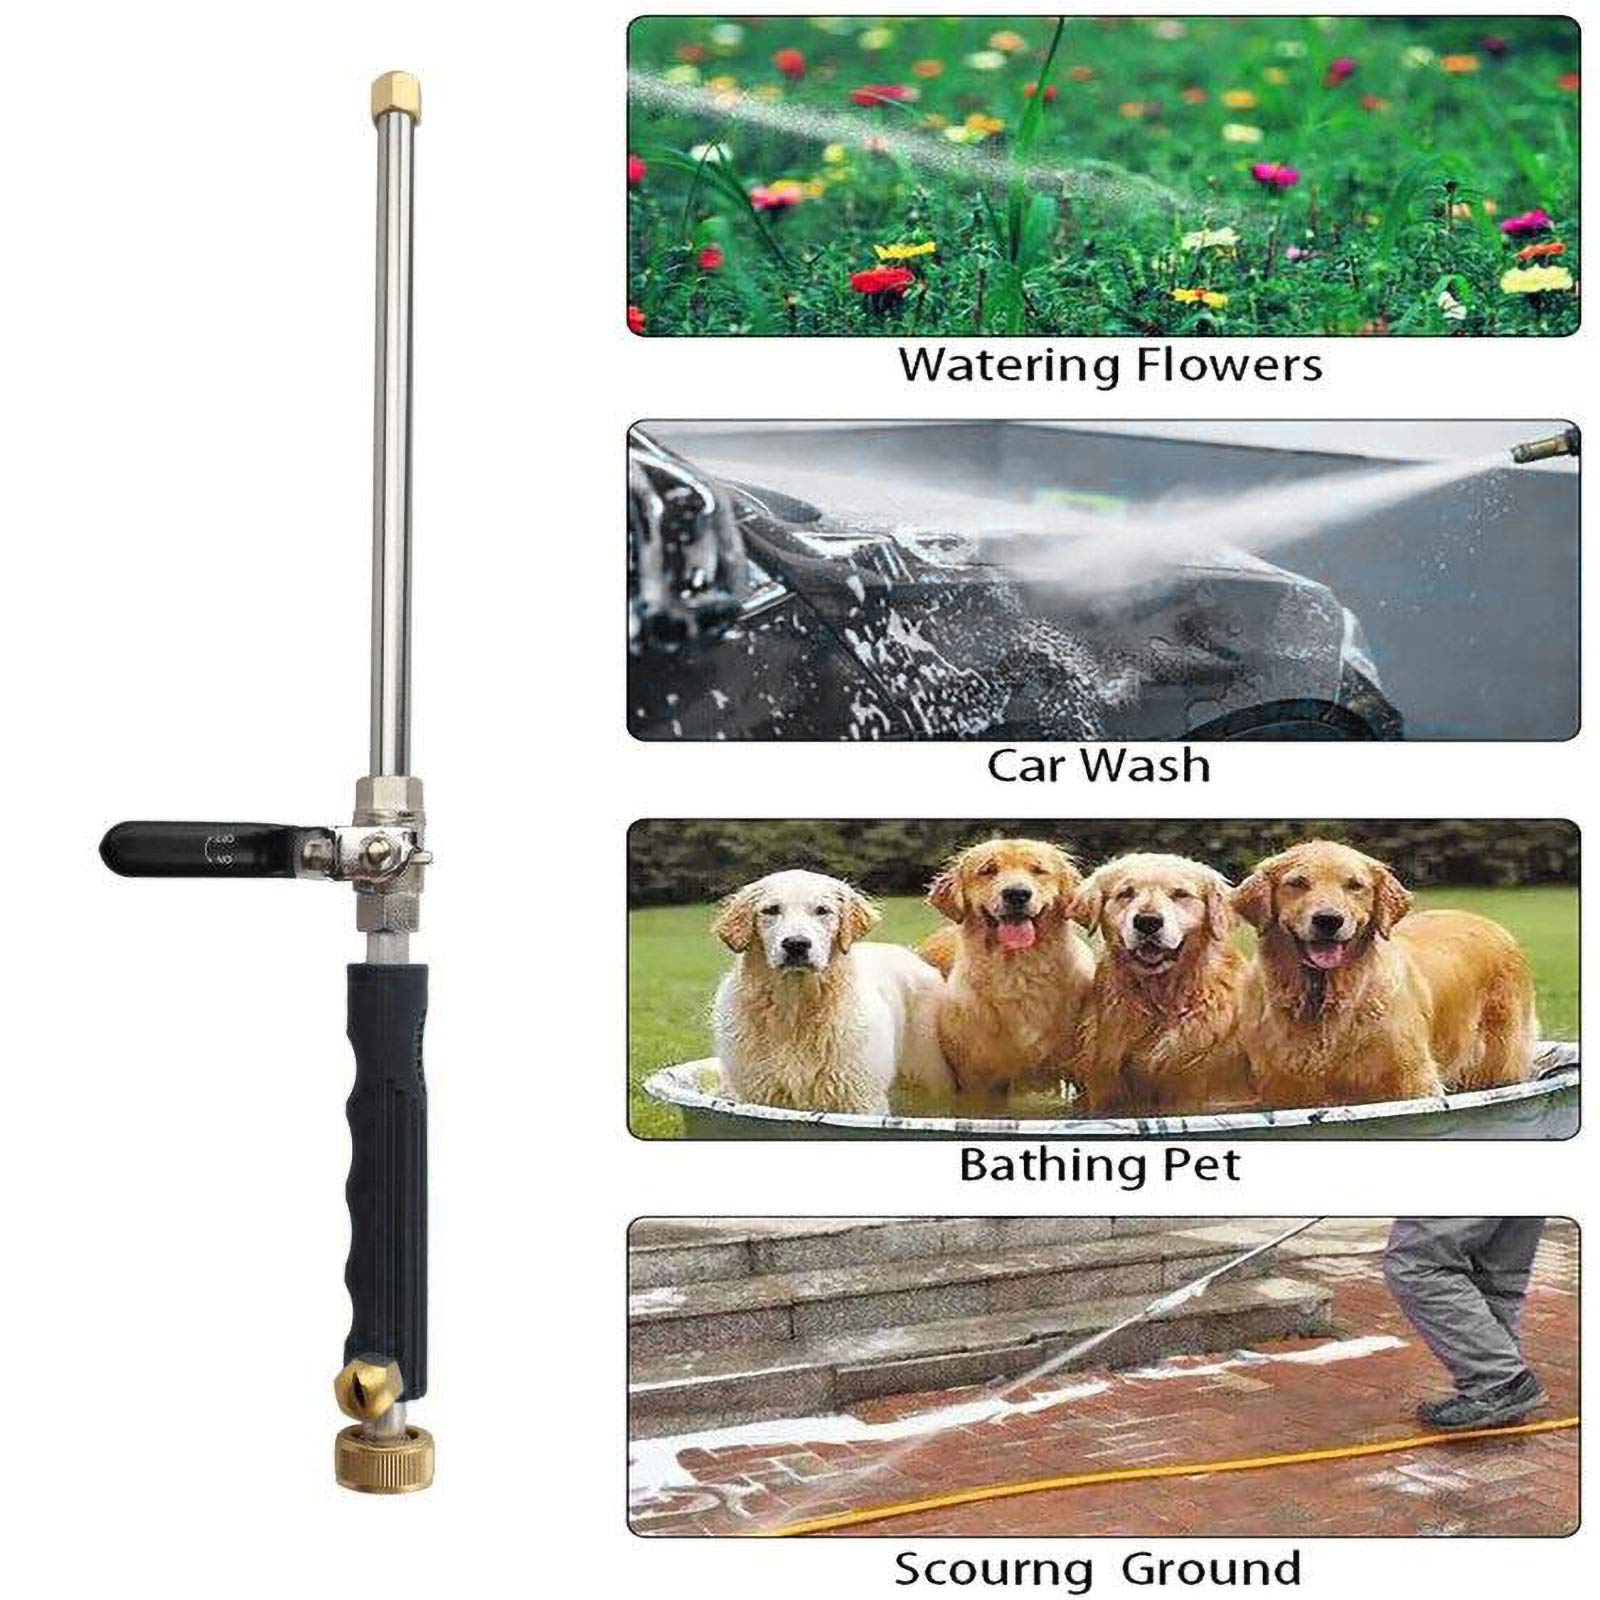 High Pressure Power Washer wand, Hydro Jet Water Hose Nozzle,Watering Sprayer Cleaning Tool, Wand Lance for Gutter Patio Car Pet Window Glass Black